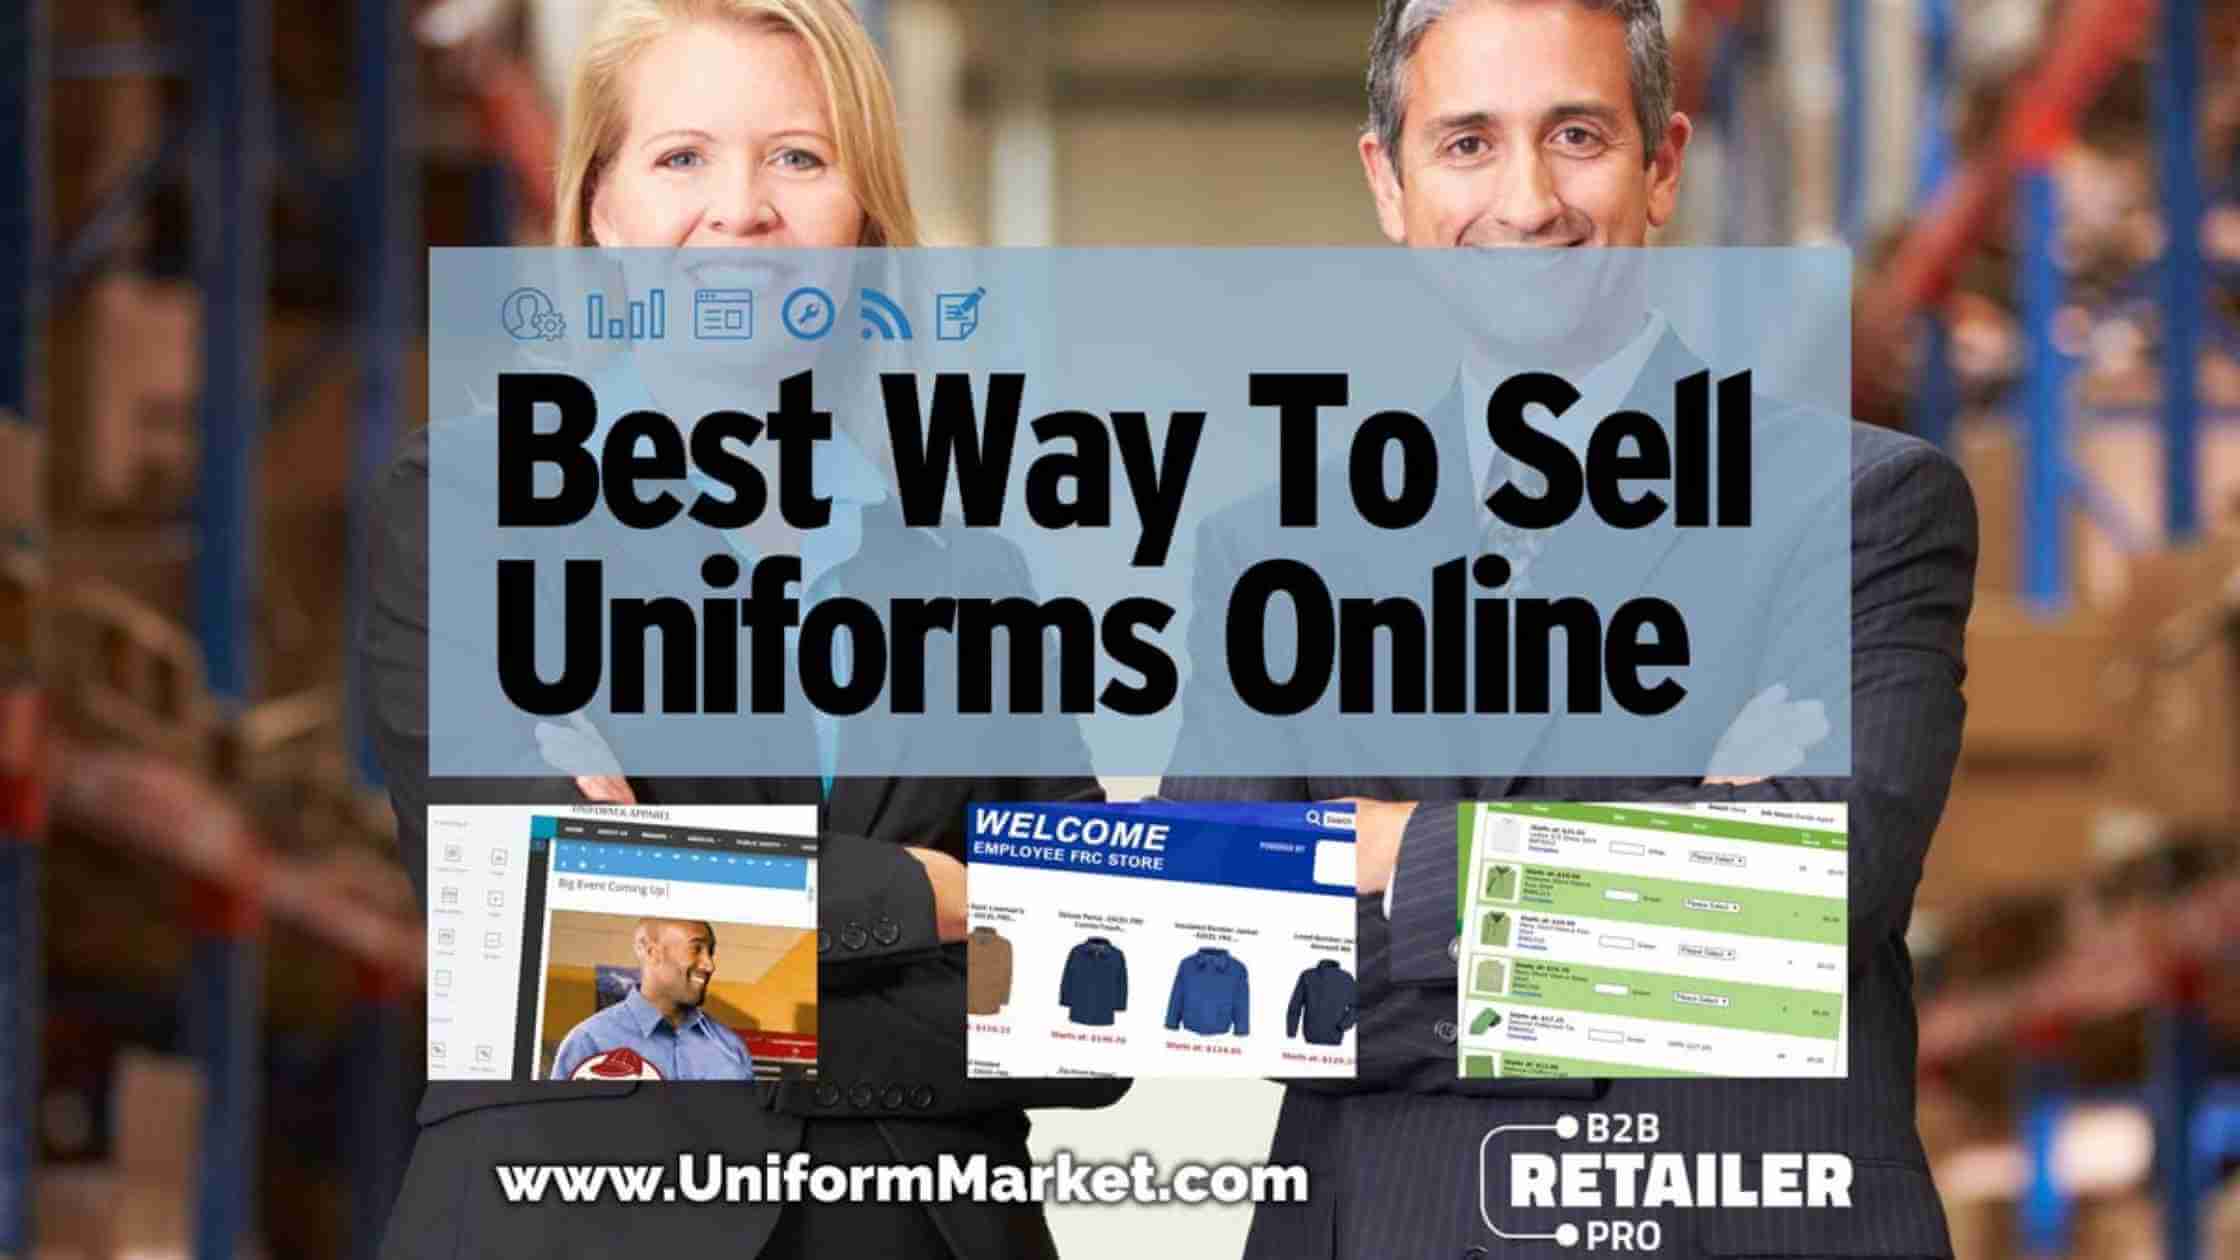 2 efficient solutions to effortlessly sell uniforms online